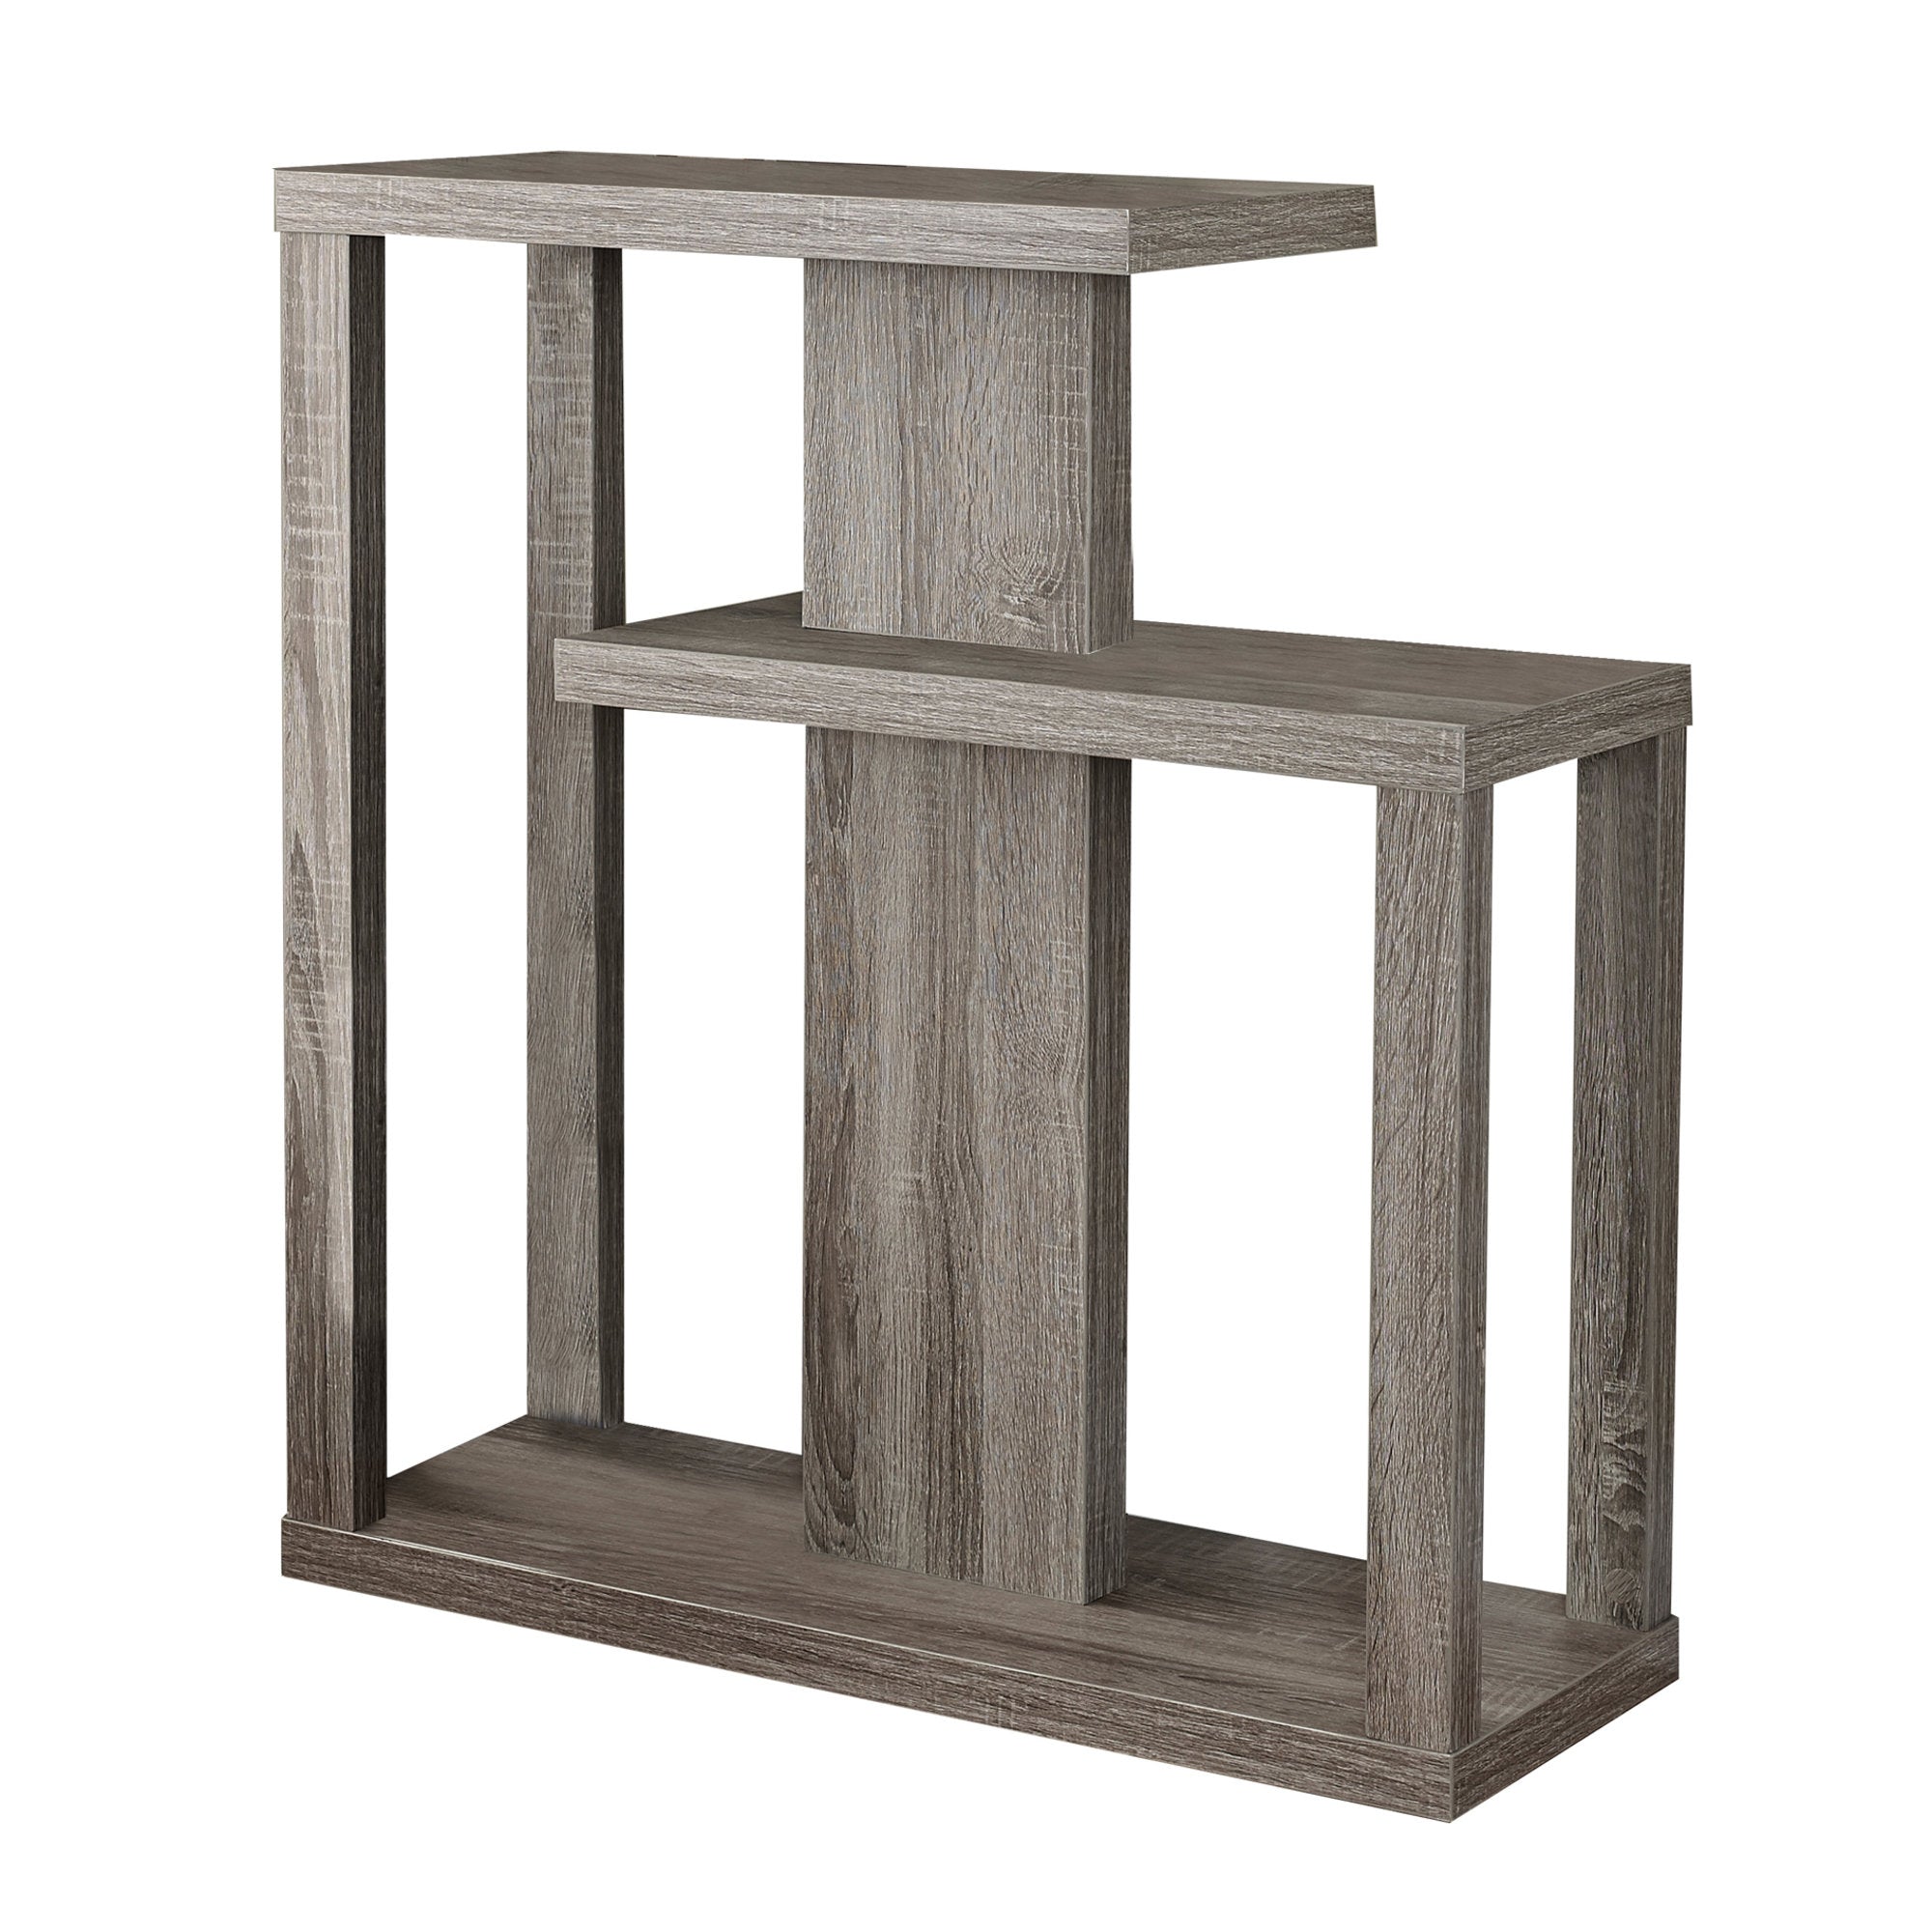 MN-322472    Accent Table, Console, Entryway, Narrow, Sofa, Living Room, Bedroom, Laminate, Dark Taupe, Contemporary, Modern